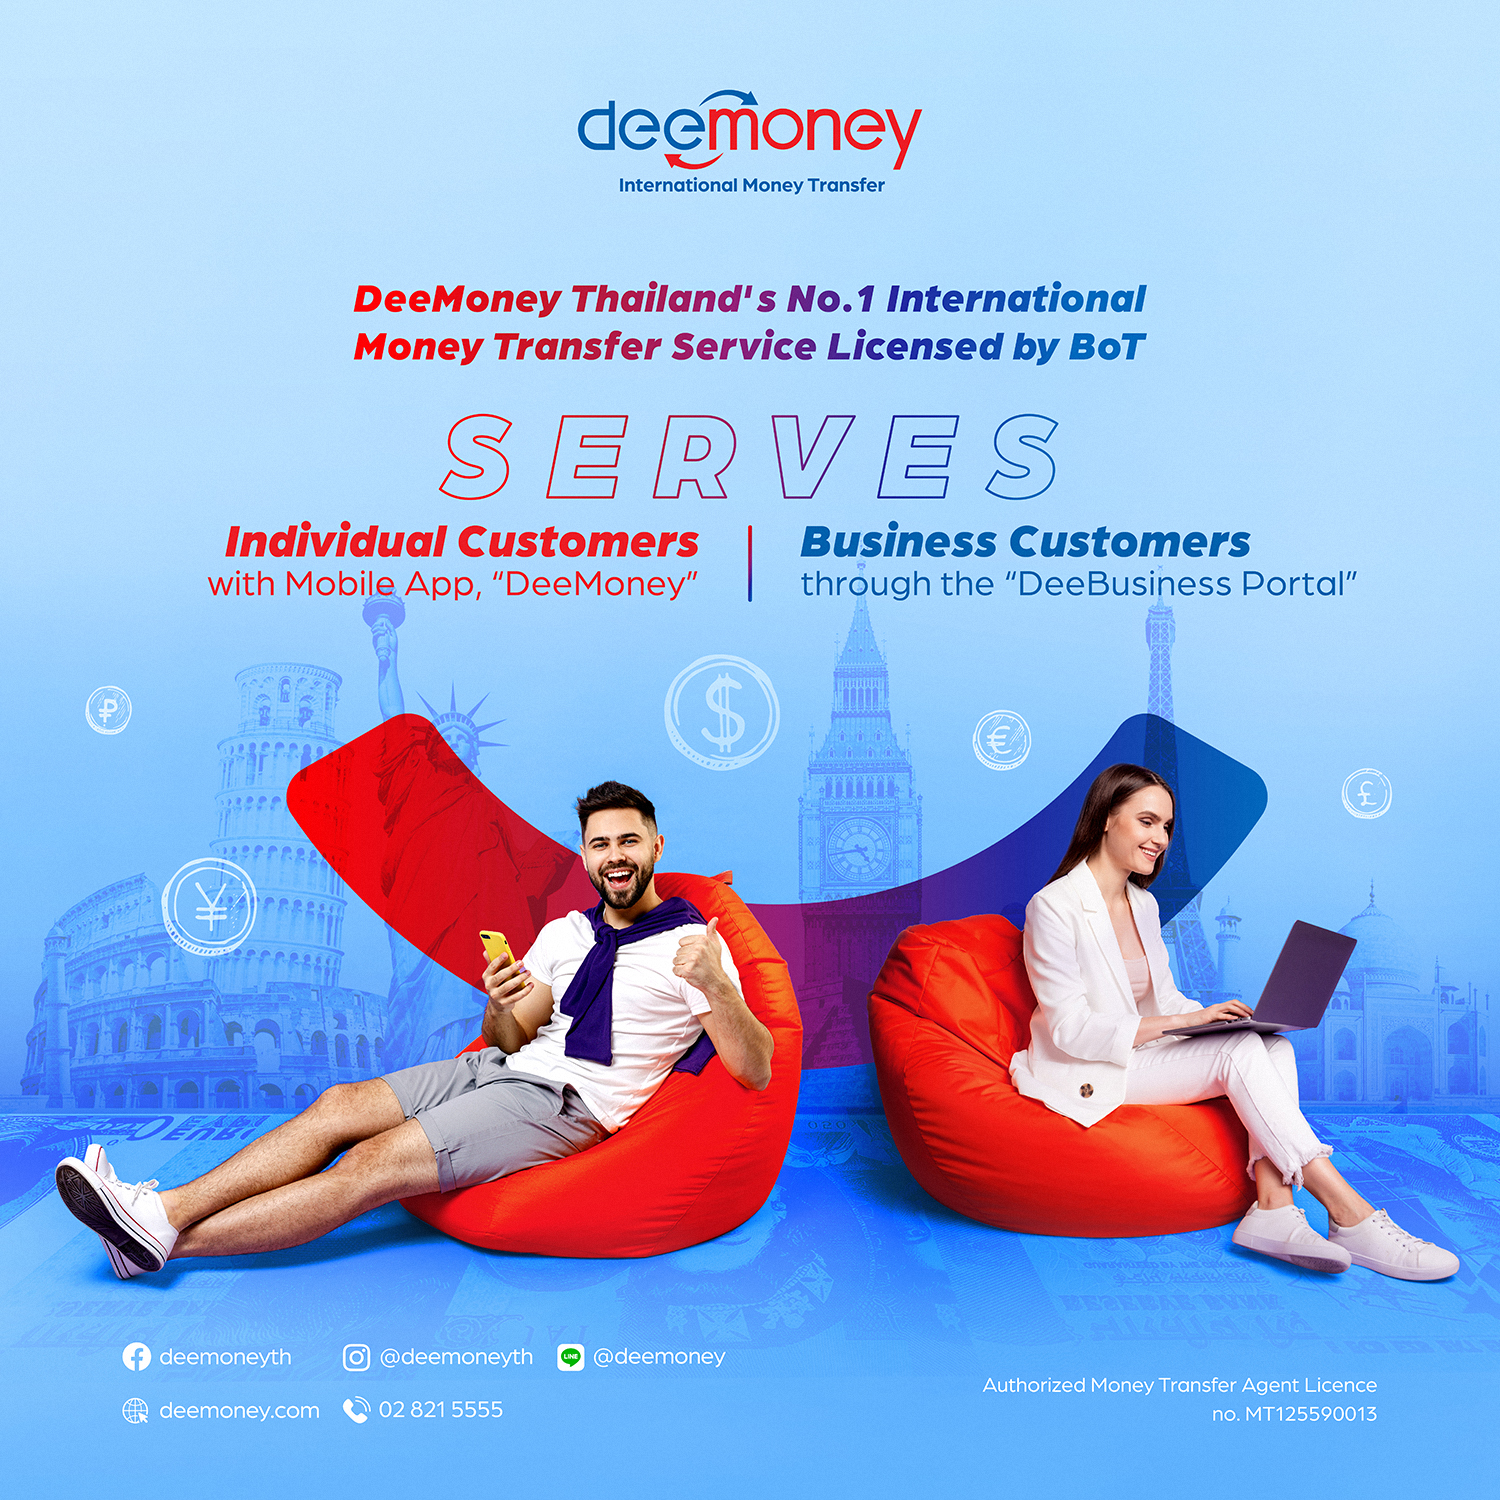 DeeMoney serves both individual and business customers